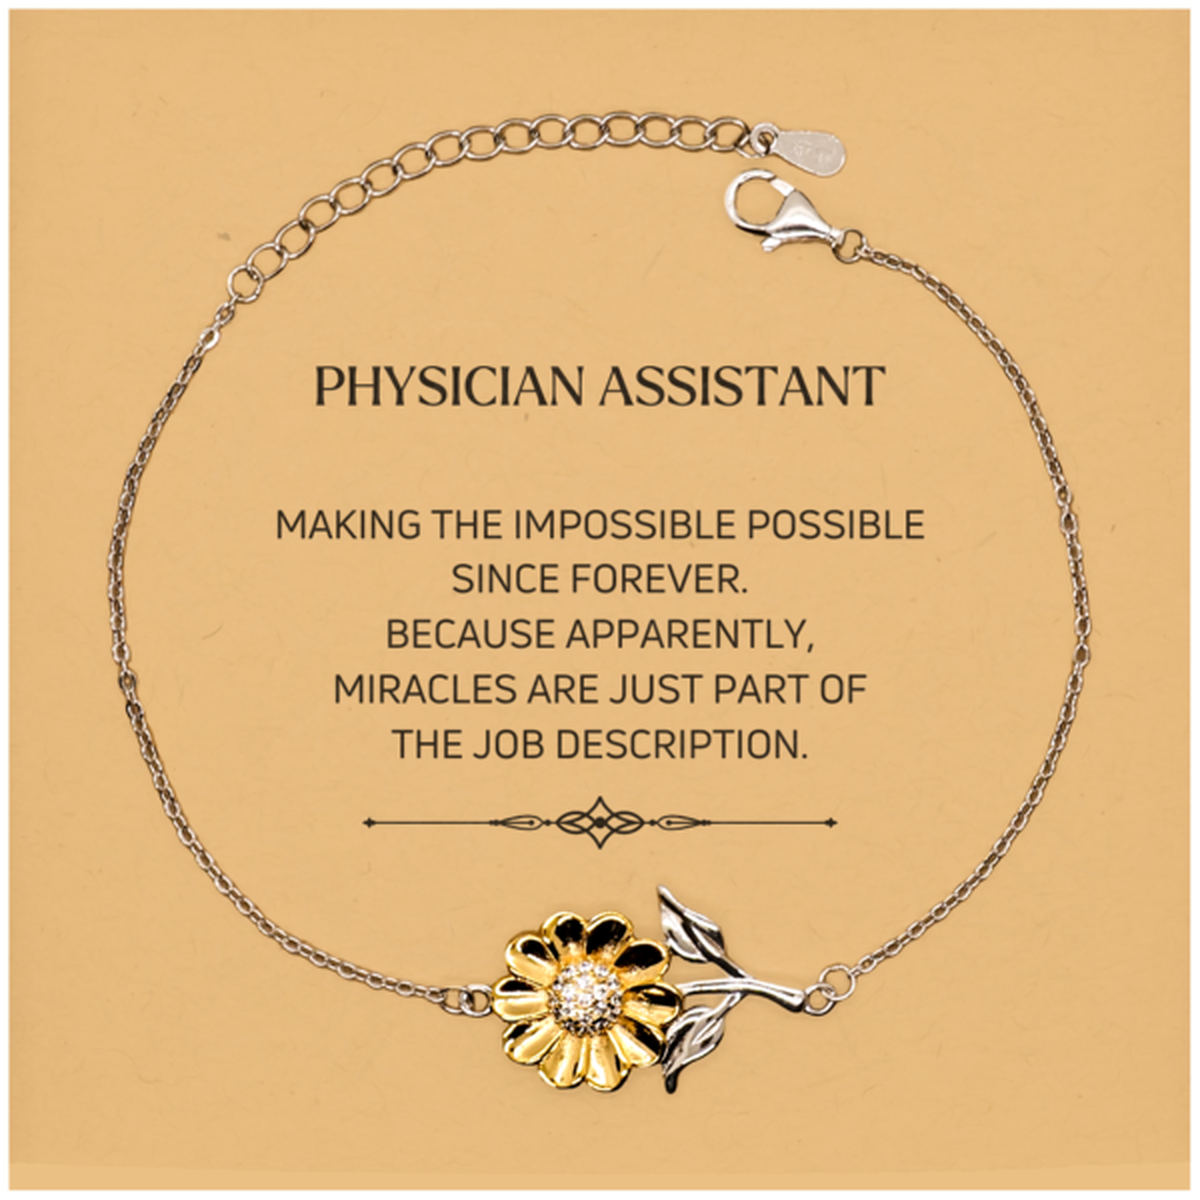 Funny Physician Assistant Gifts, Miracles are just part of the job description, Inspirational Birthday Christmas Sunflower Bracelet For Physician Assistant, Men, Women, Coworkers, Friends, Boss